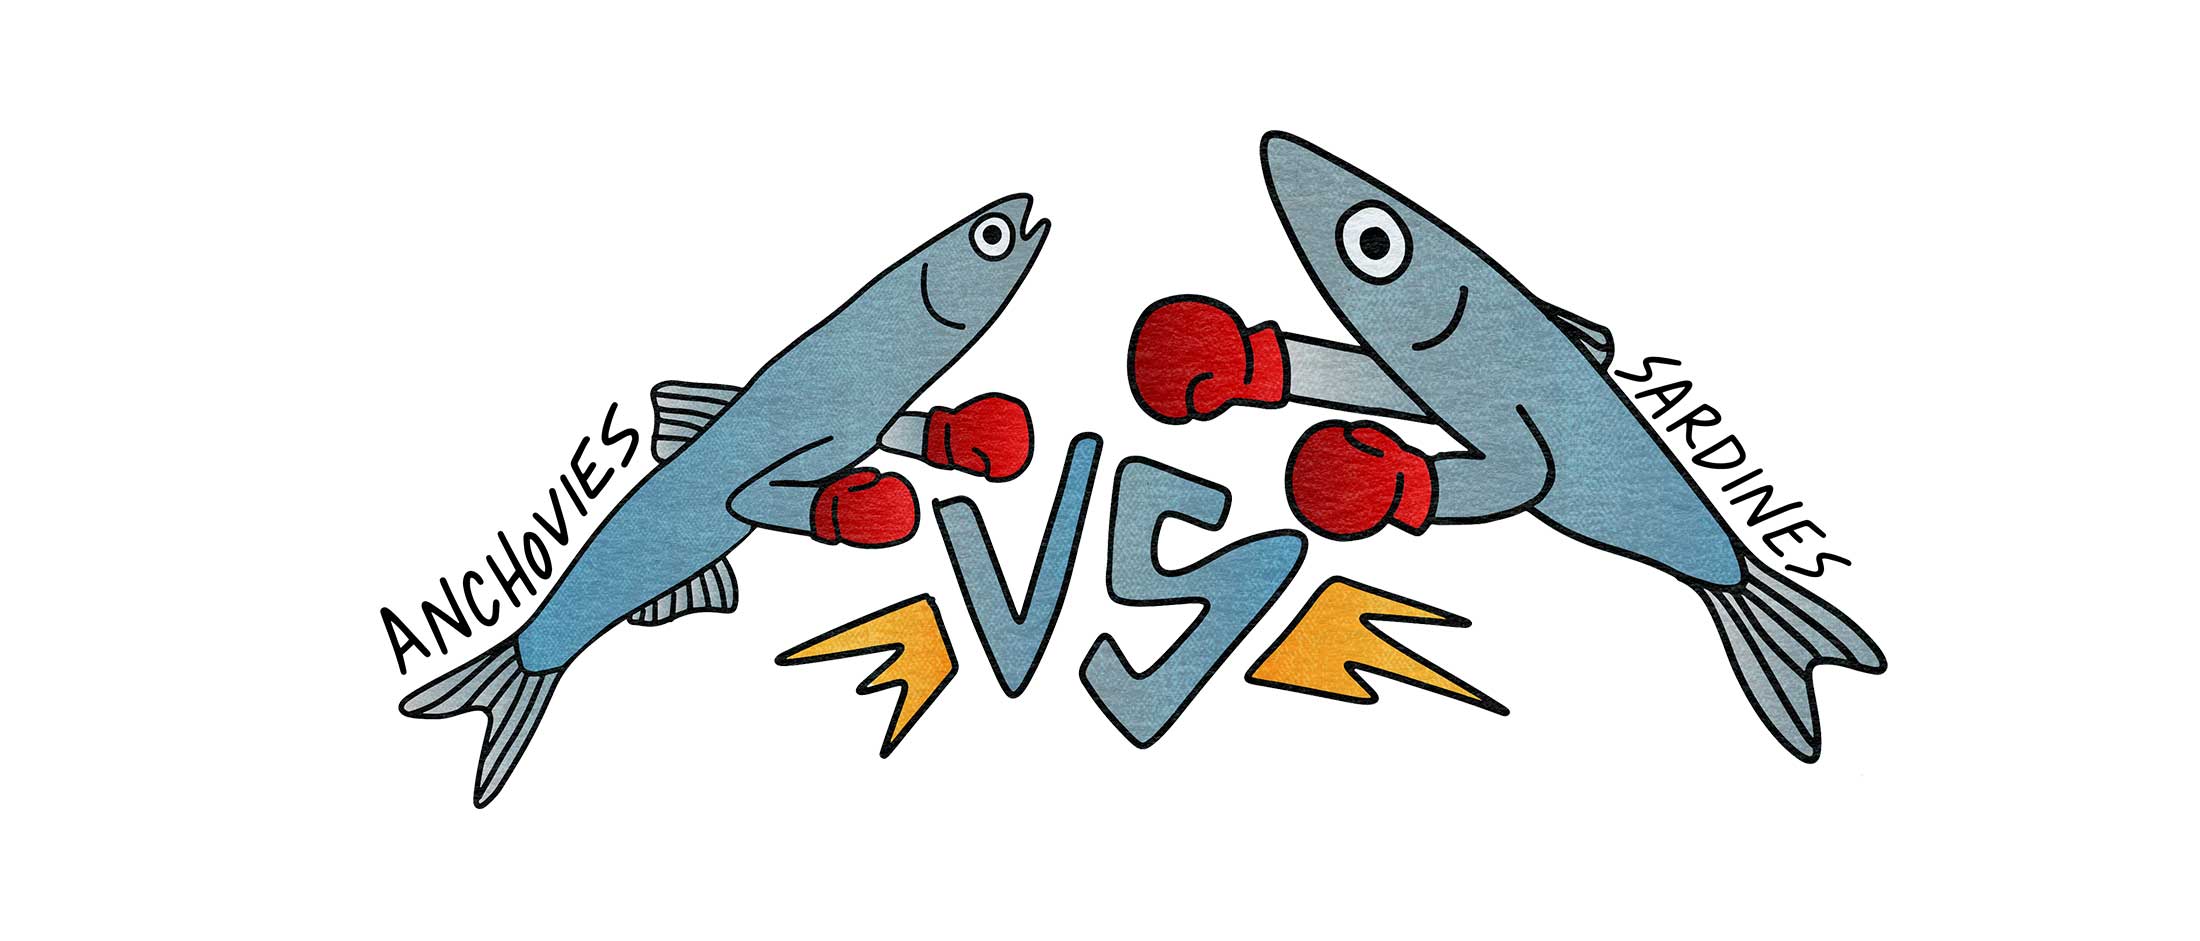 Illustration of a sardine and anchovy boxing